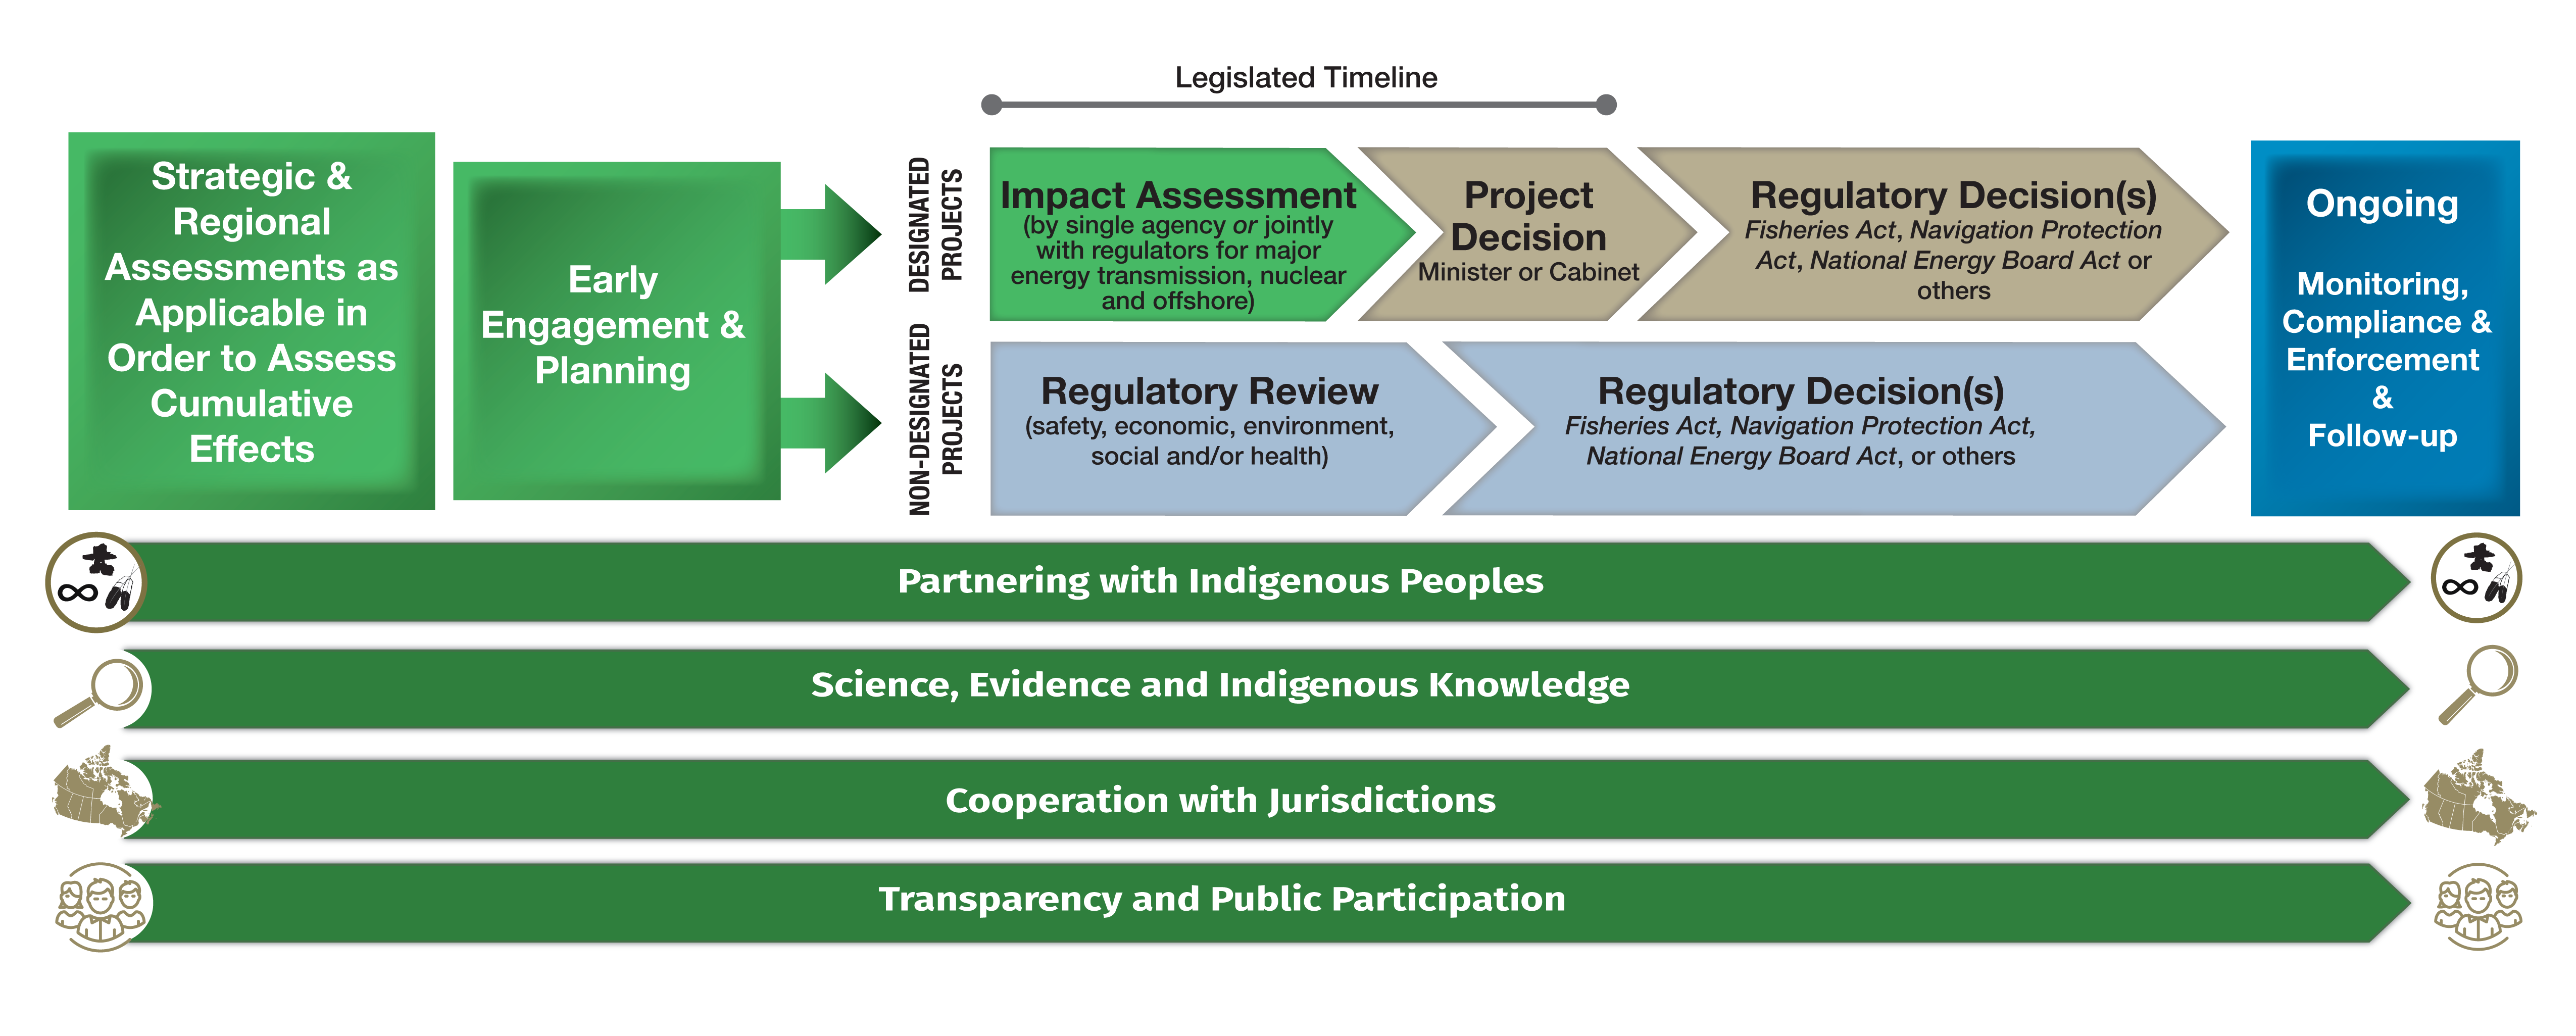 Proposed changes to Canada’s environmental assessment and regulatory processes